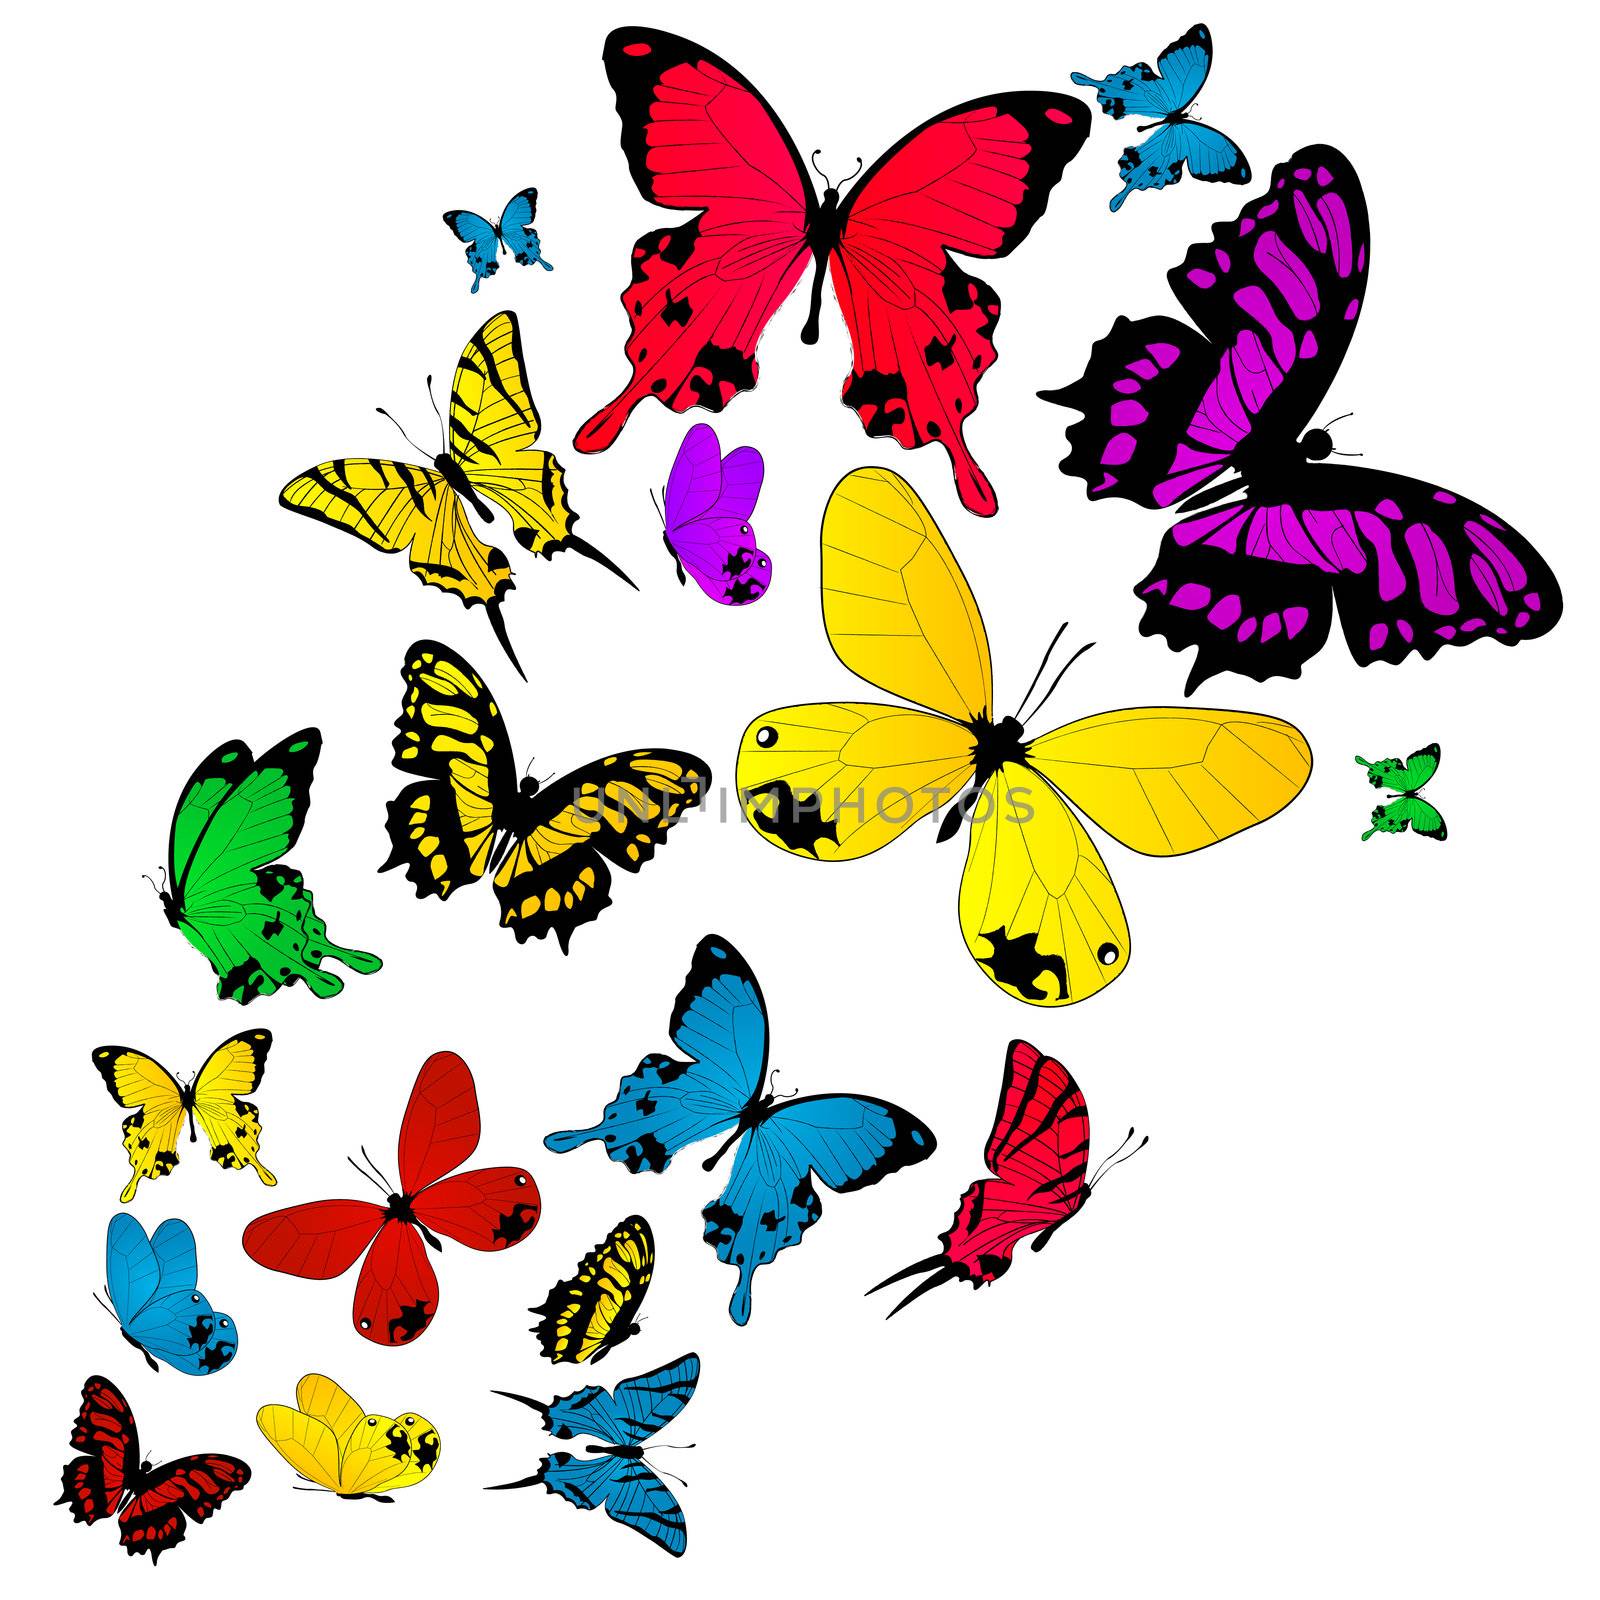 Colored butterflies sketch on white